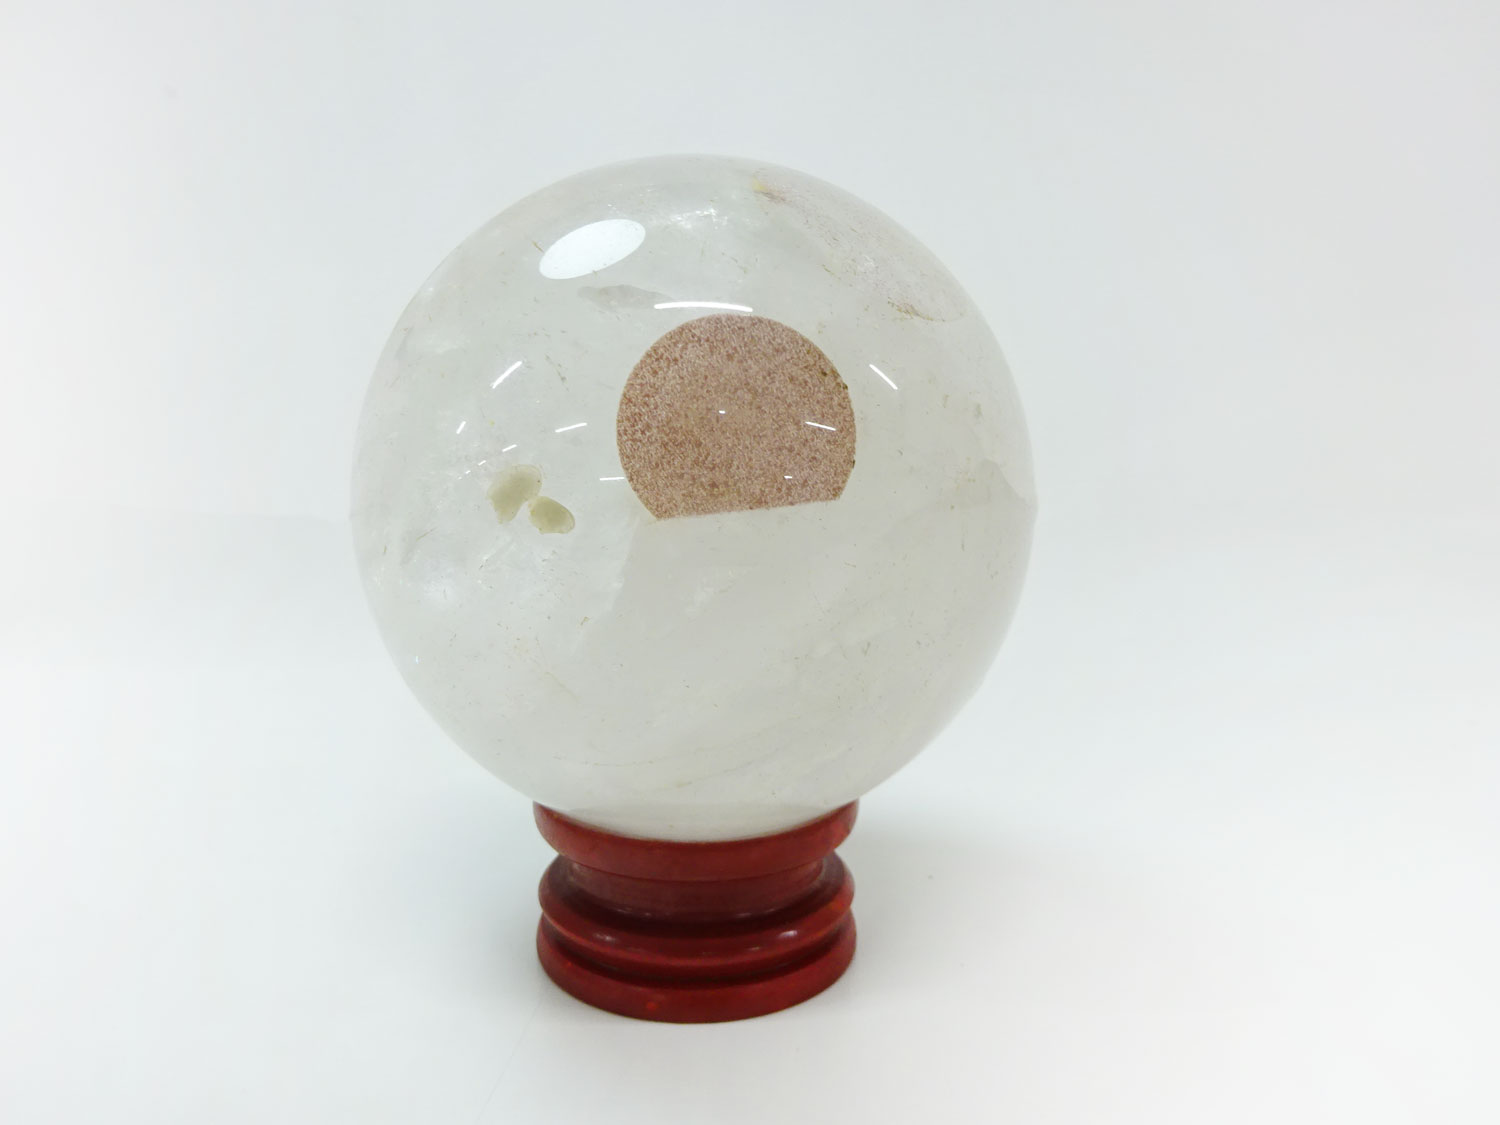 JAPANESE ORNAMENT / NATURAL CRYSTAL & MINERAL (1620g) / HEALING CRYSTAL SPHERE